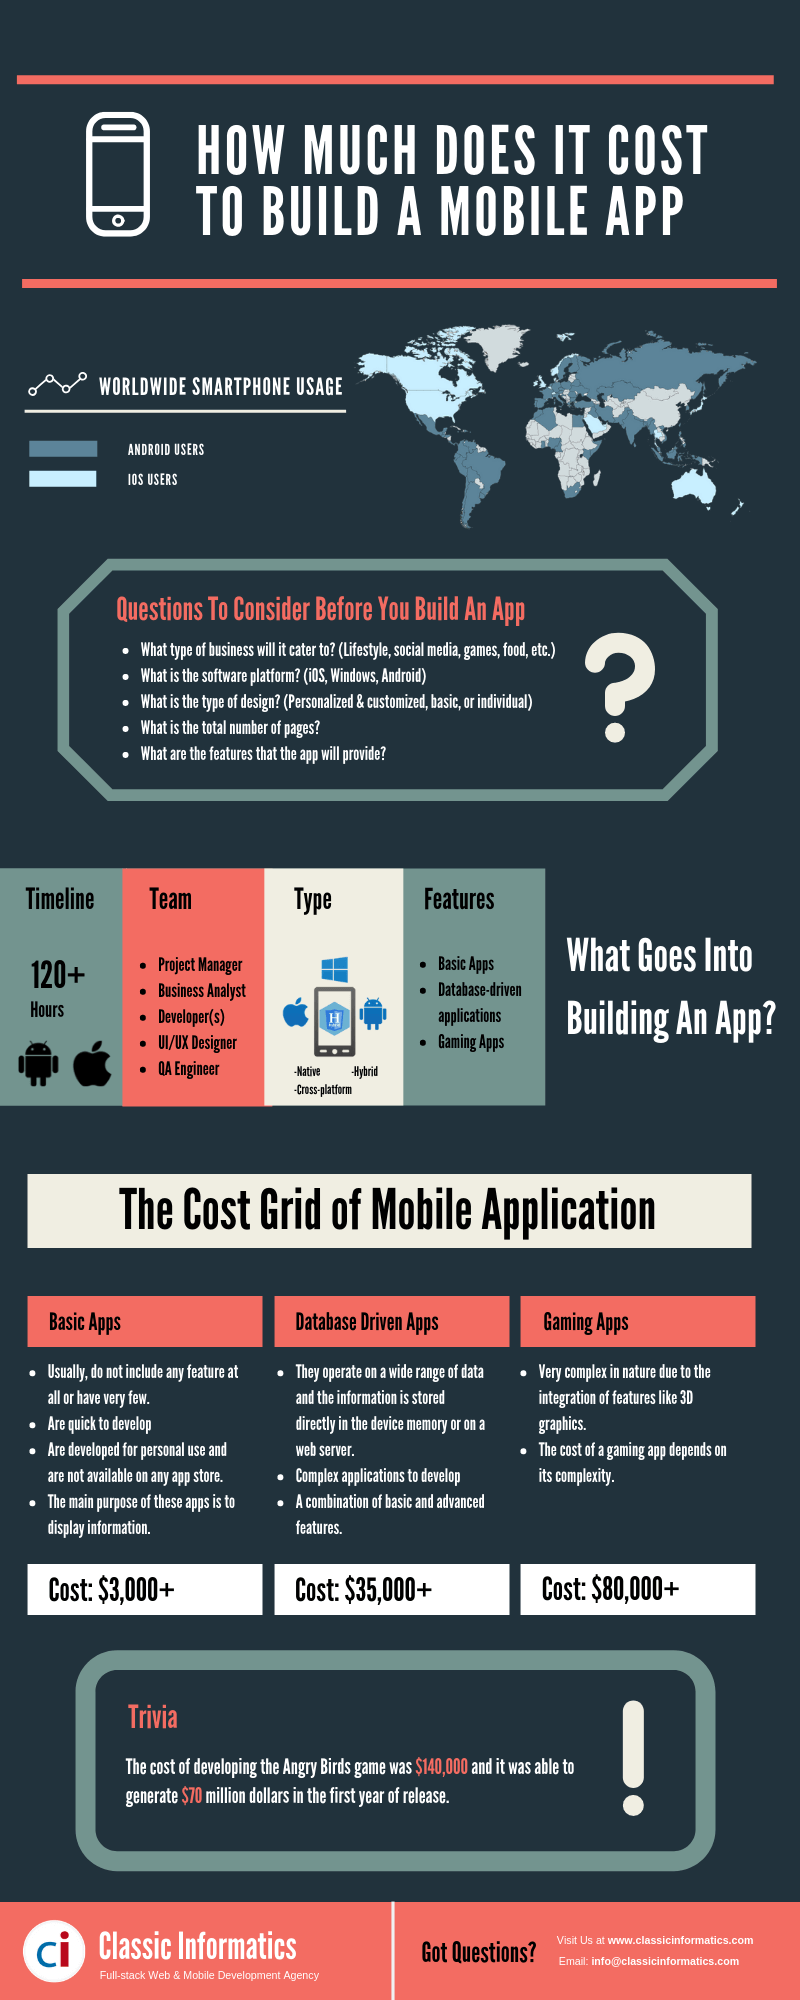 The Real Cost Of Developing a Mobile App in 2019 Infographic_Classic Informatics